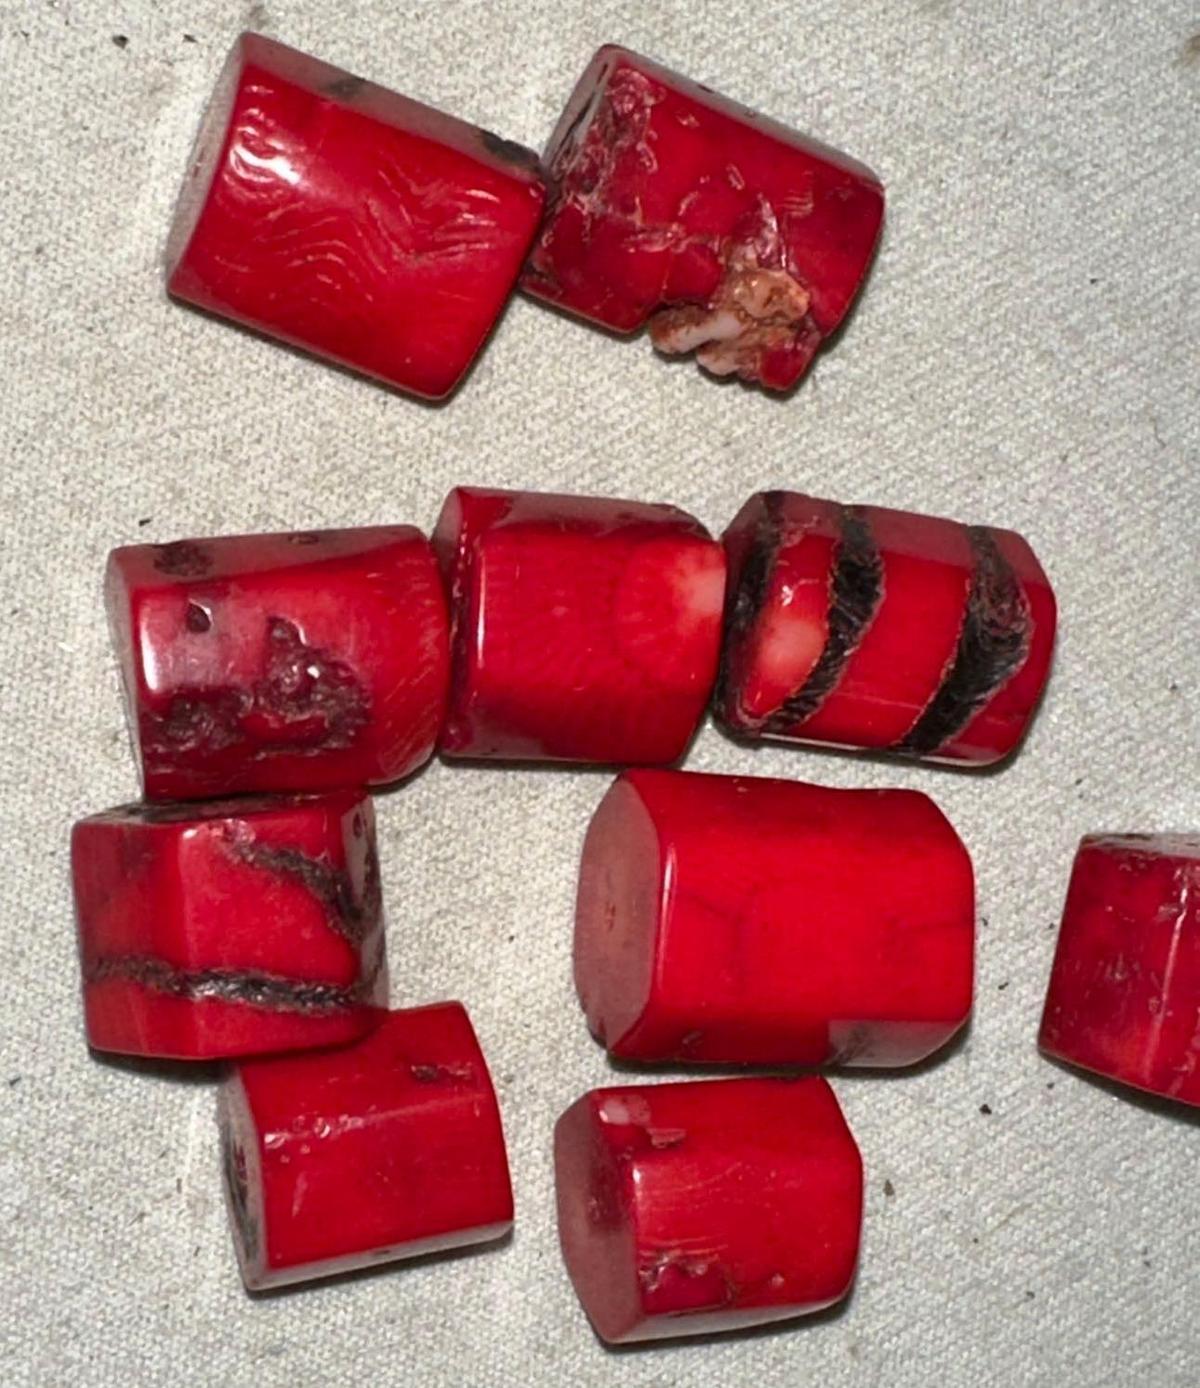 10 Blood Red Mediterranean Coral Pieces- Drilled for a Necklace